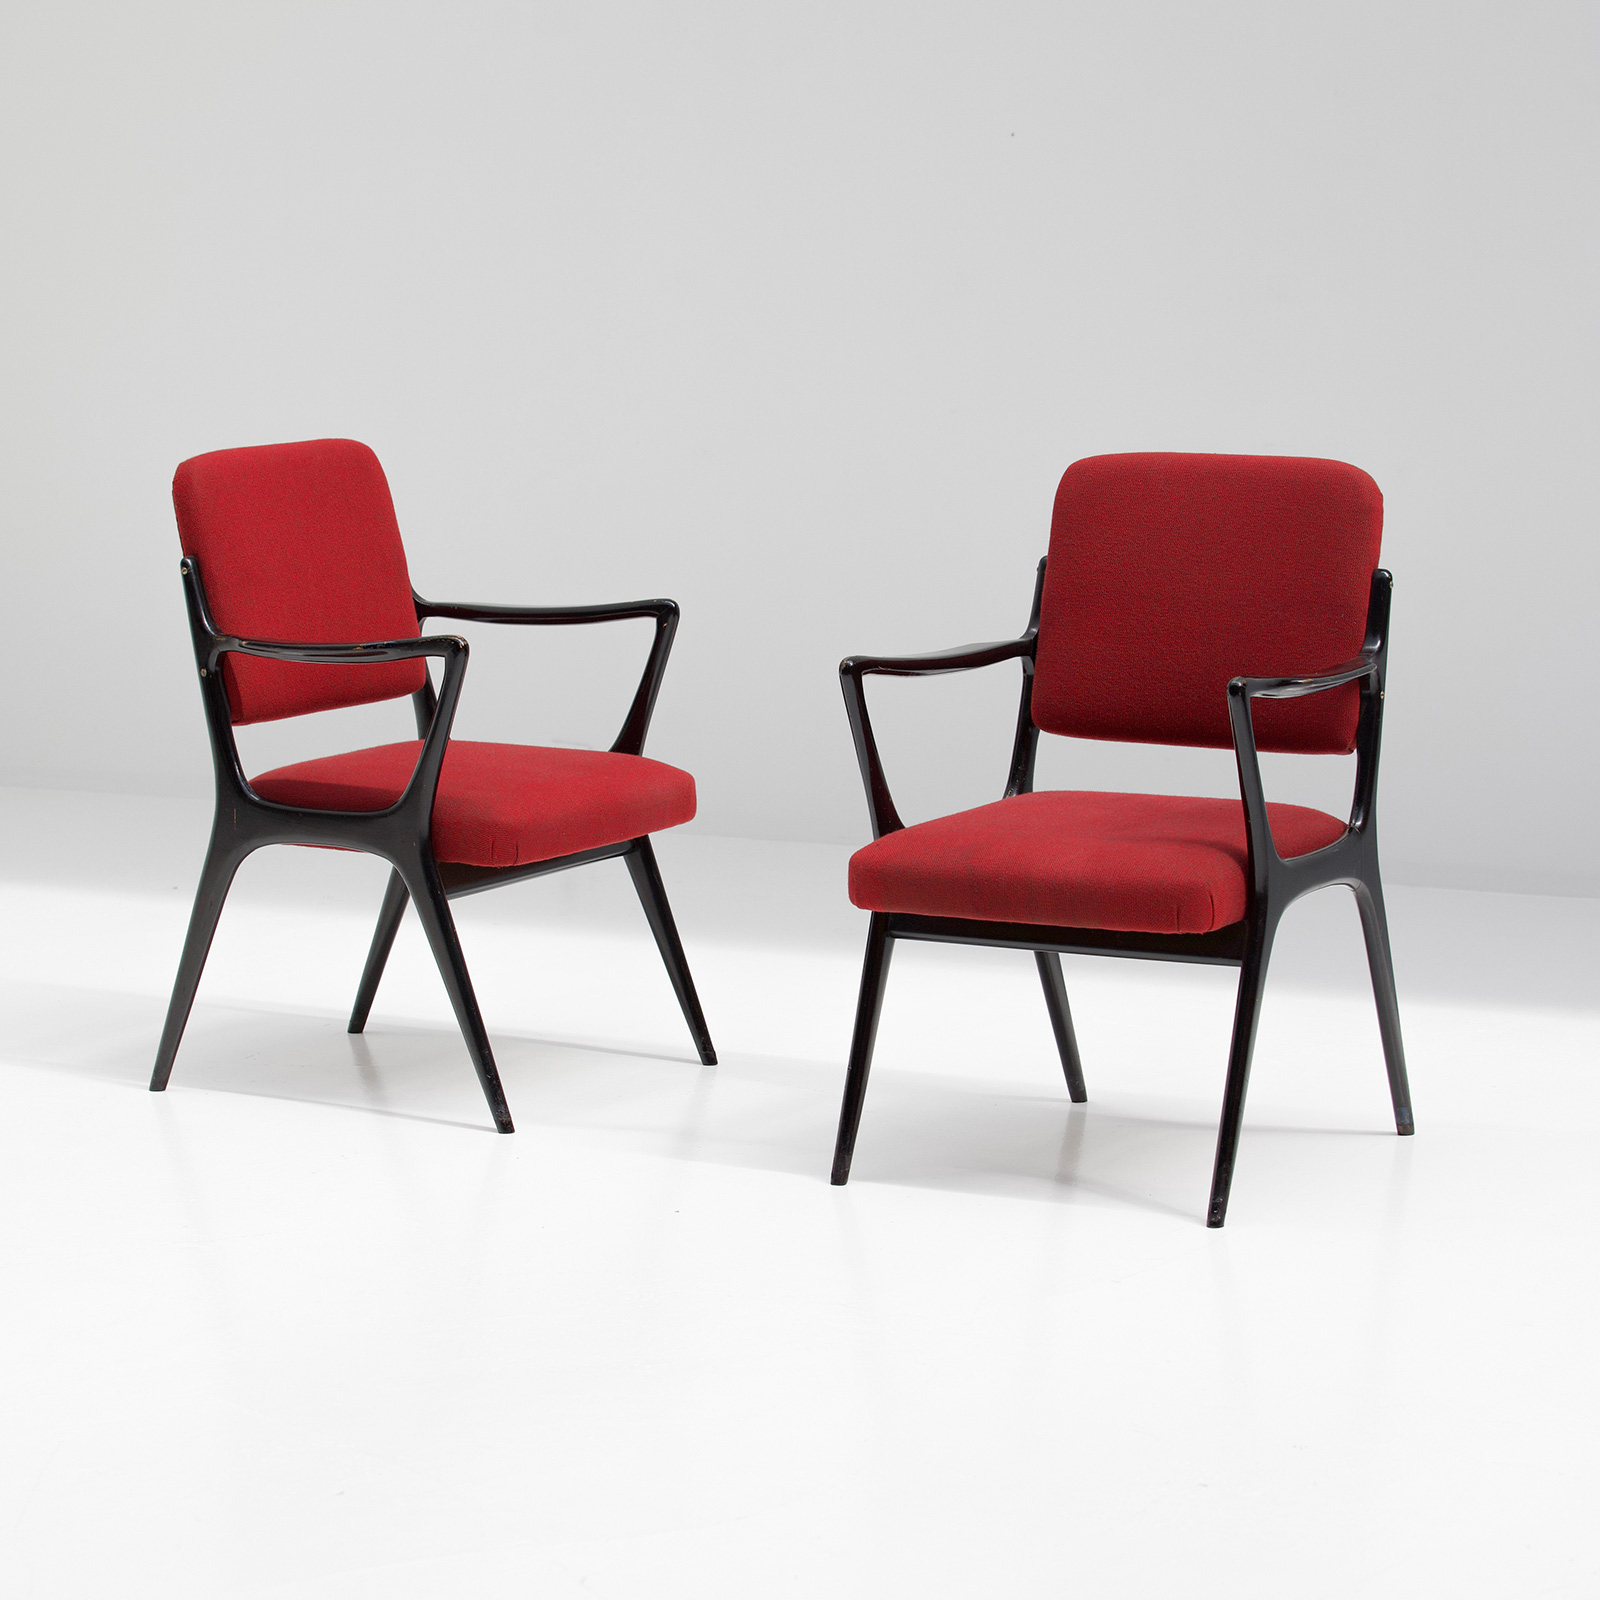 Two Chairs By Alfred Hendrickx for Belform